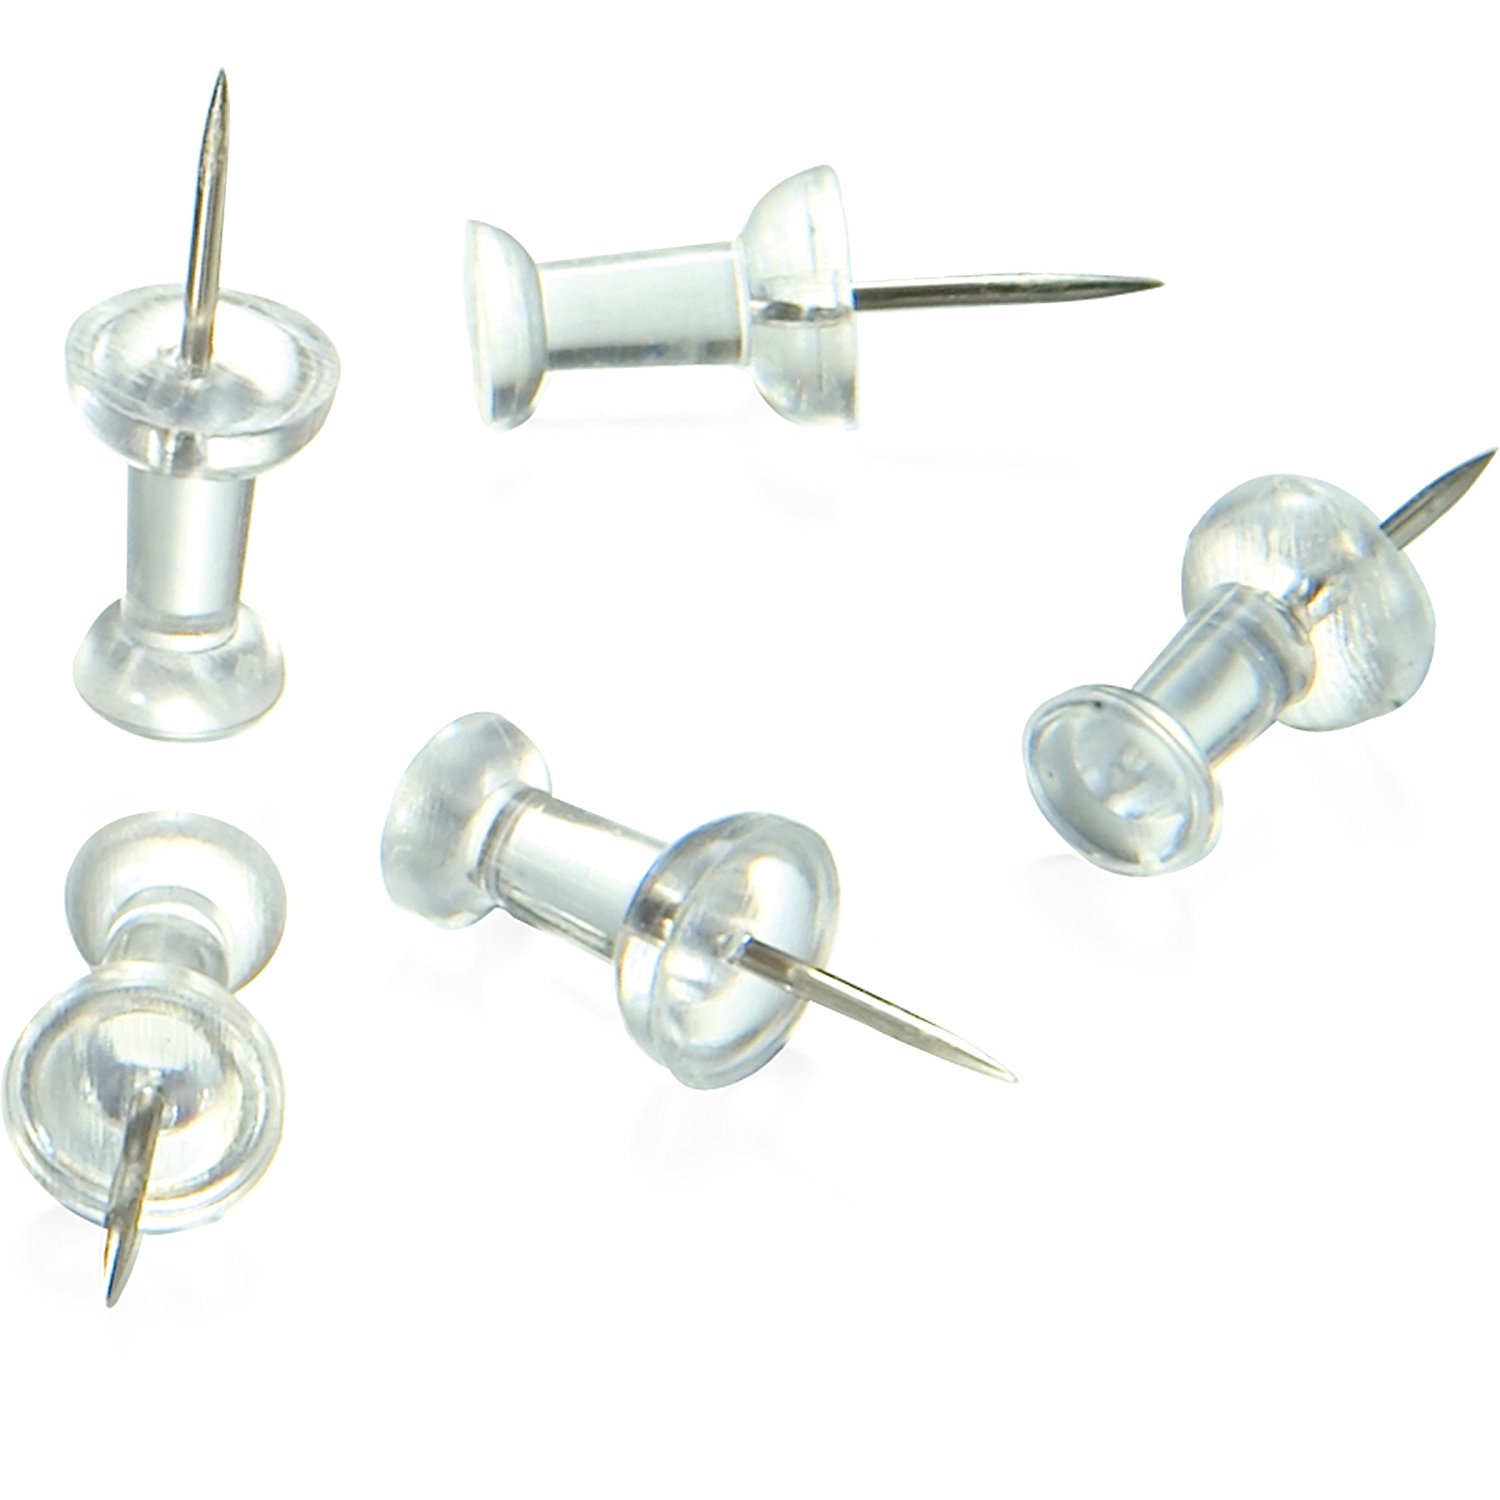 Amazon.com : Officemate Push Pins, Clear, 200 Count (35711) : Tacks ...